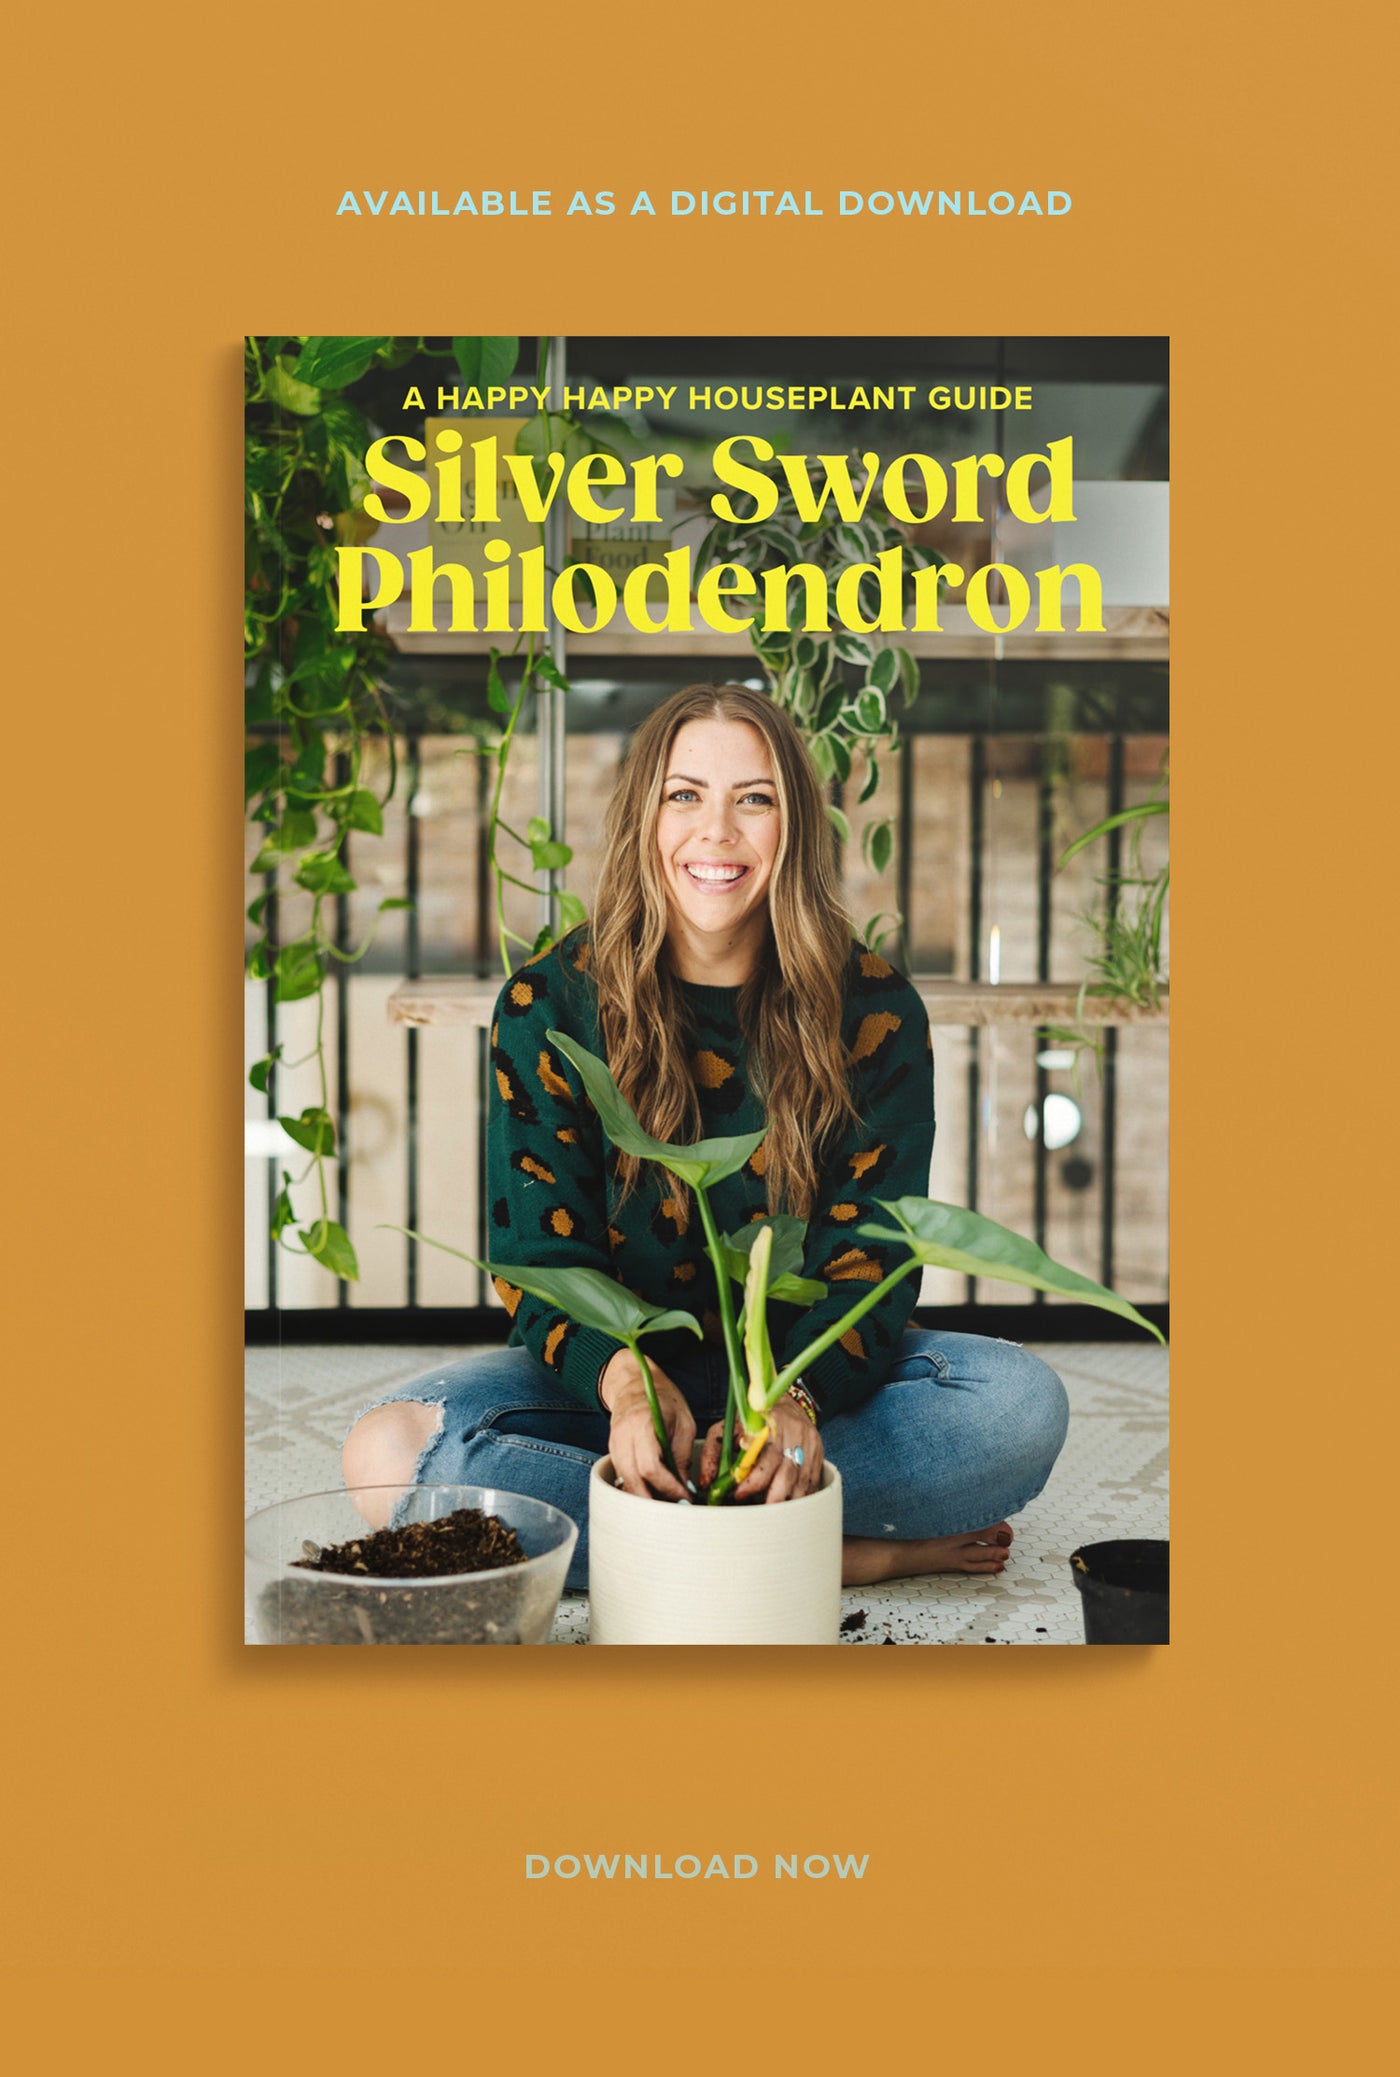 Silver Sword Philodendron Digital Care Guide